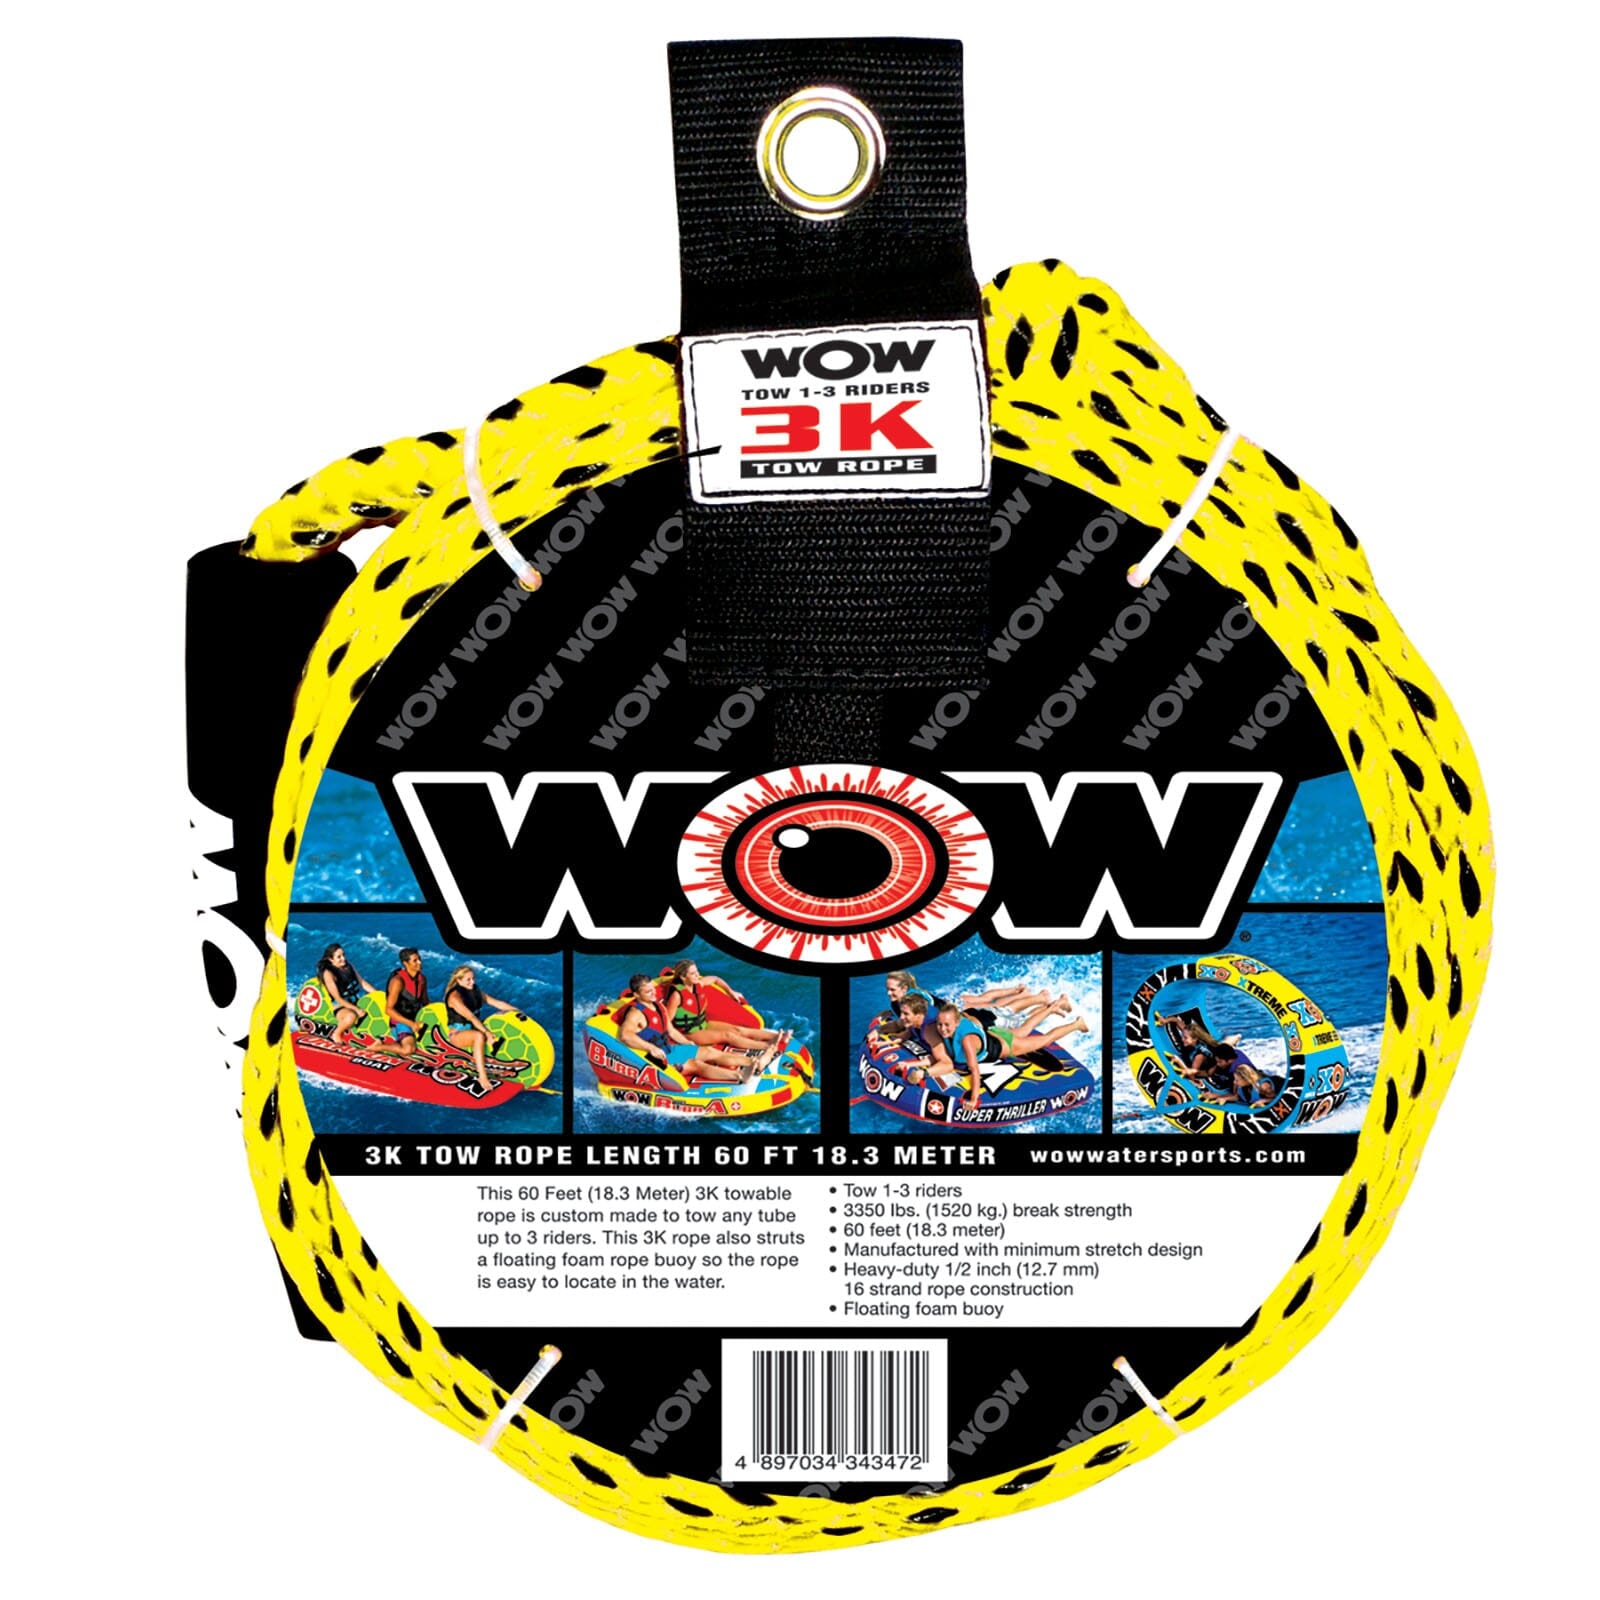 Wow Watersports 17-3030 3K 60' Tow Rope